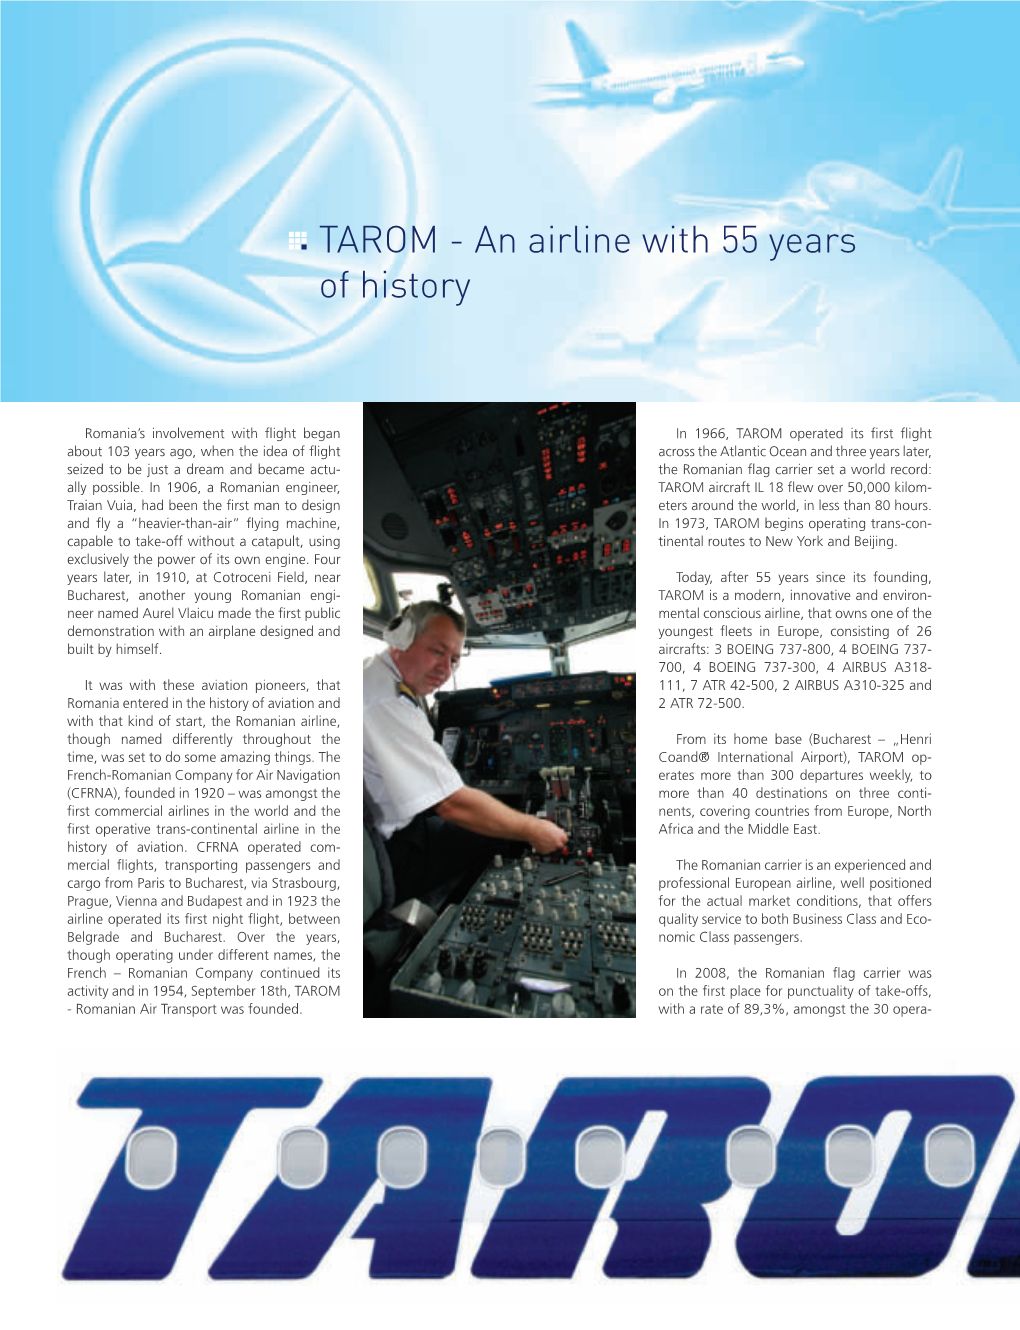 TAROM - an Airline with 55 Years of History